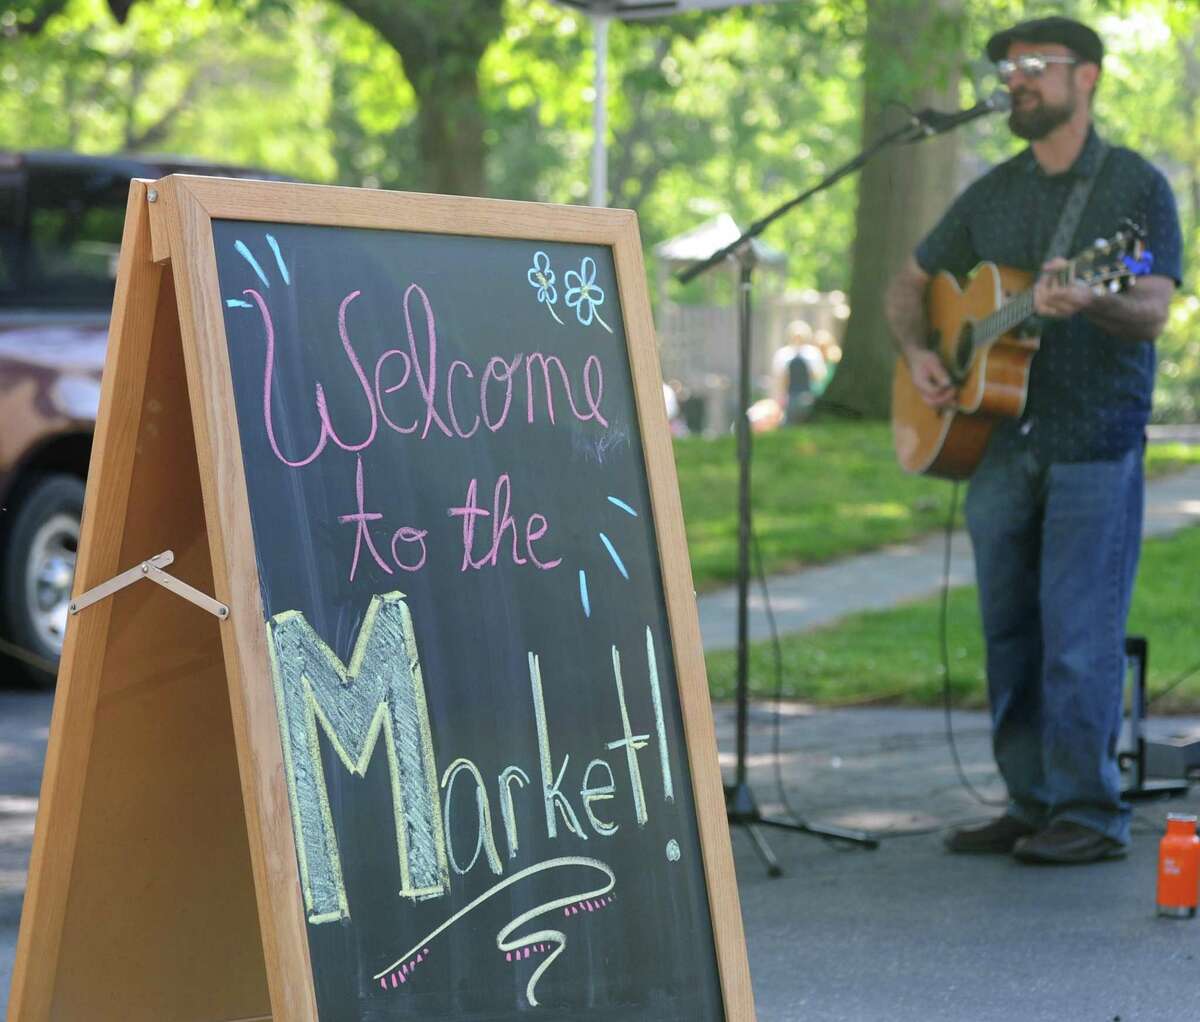 A Old Greenwich Farmers Market is held, rain or shine, every Wednesday from 2:30 to 6 p.m. at the Presbyterian Church of Old Greenwich. More than a dozen vendors sell a variety of items, ranging from produce and baked goods to arts and crafts.